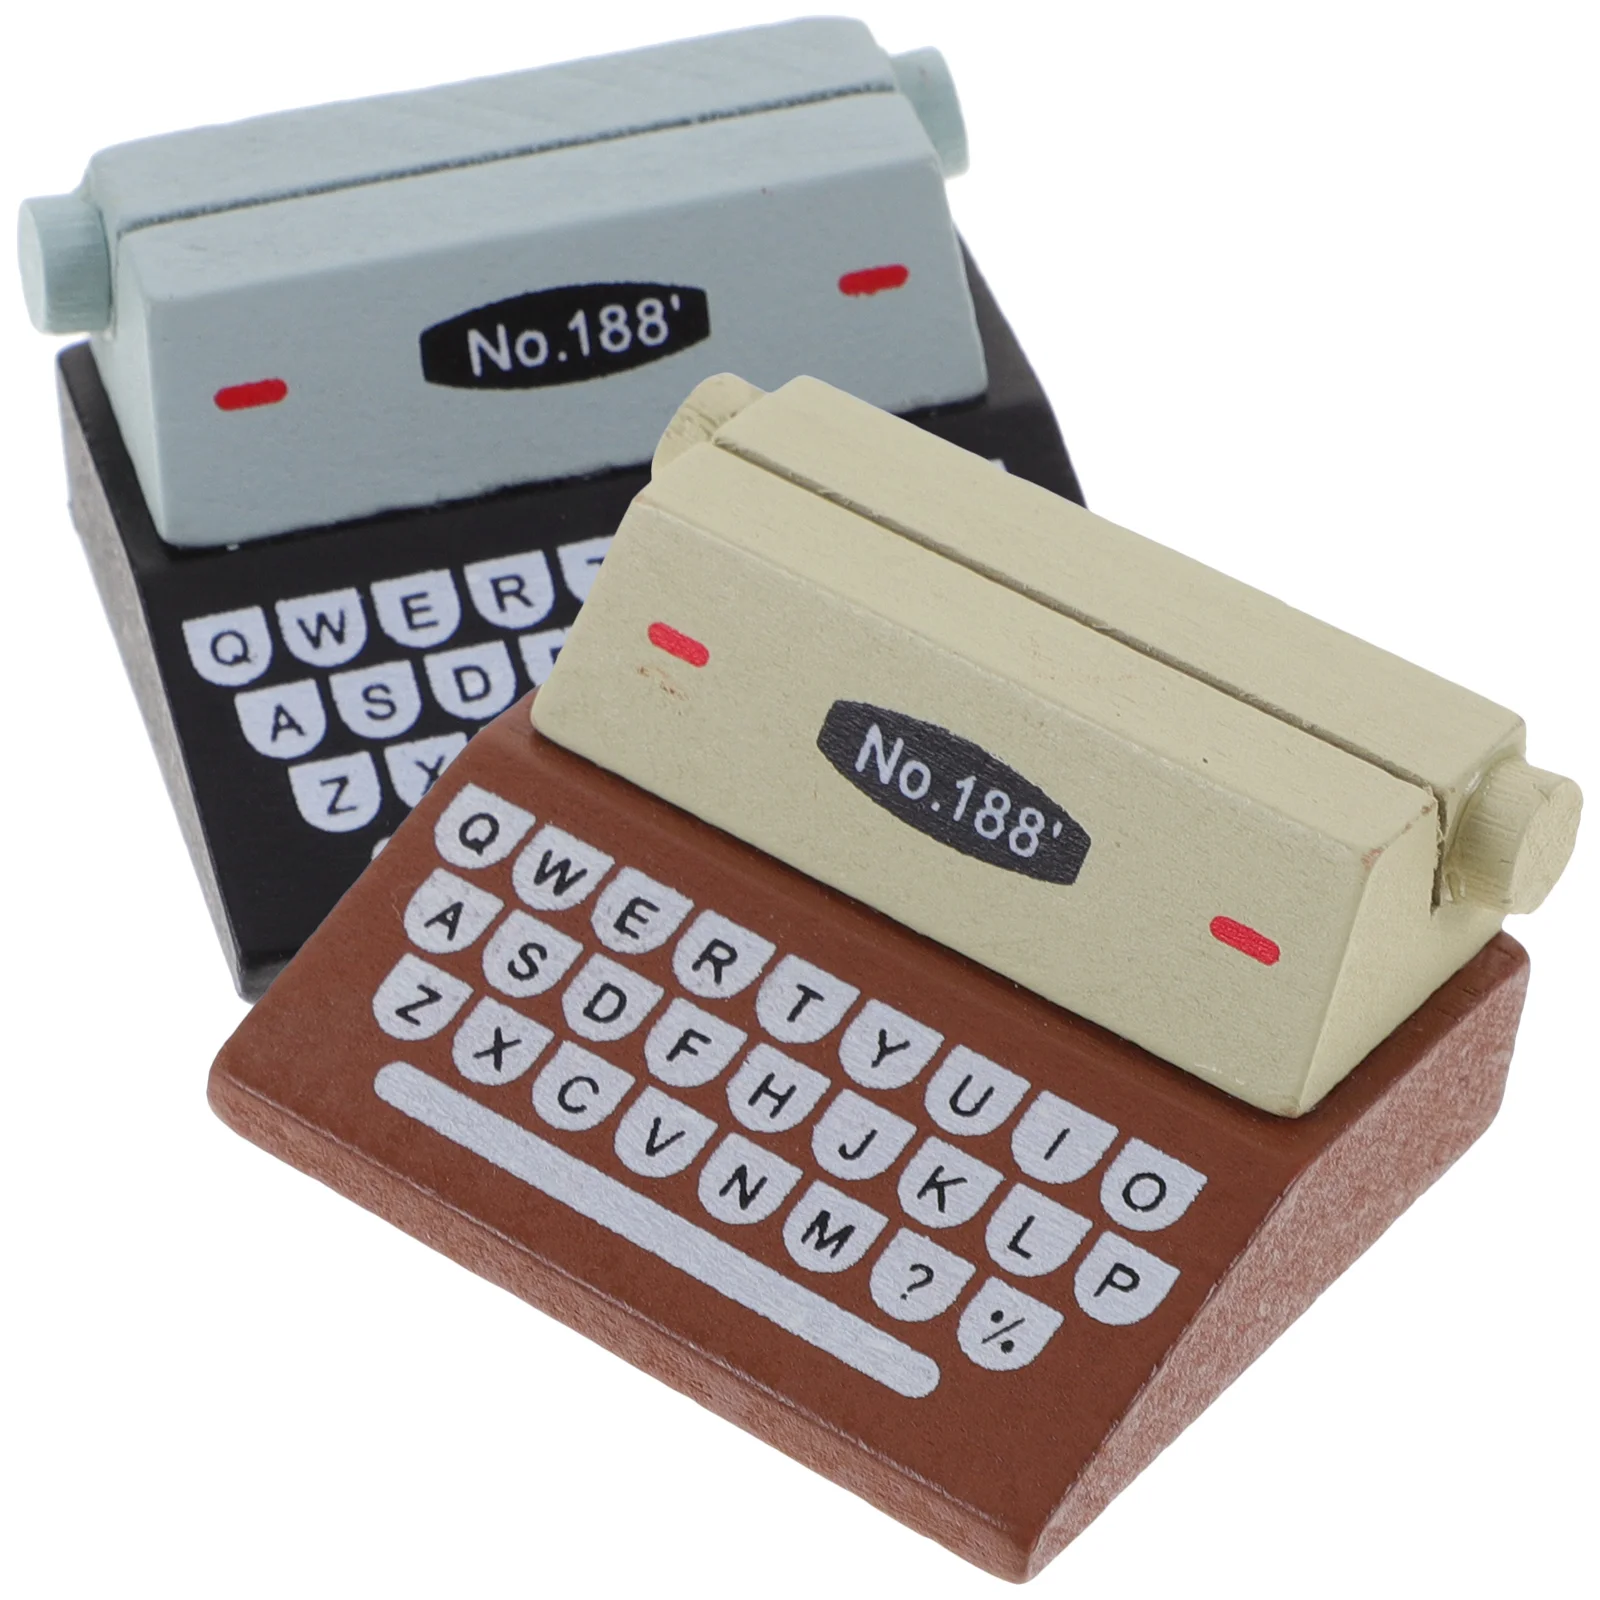 2Pcs Cartoon Typewriters Style Place Cards Holders Photo Holders Party Favors Wedding Decoration